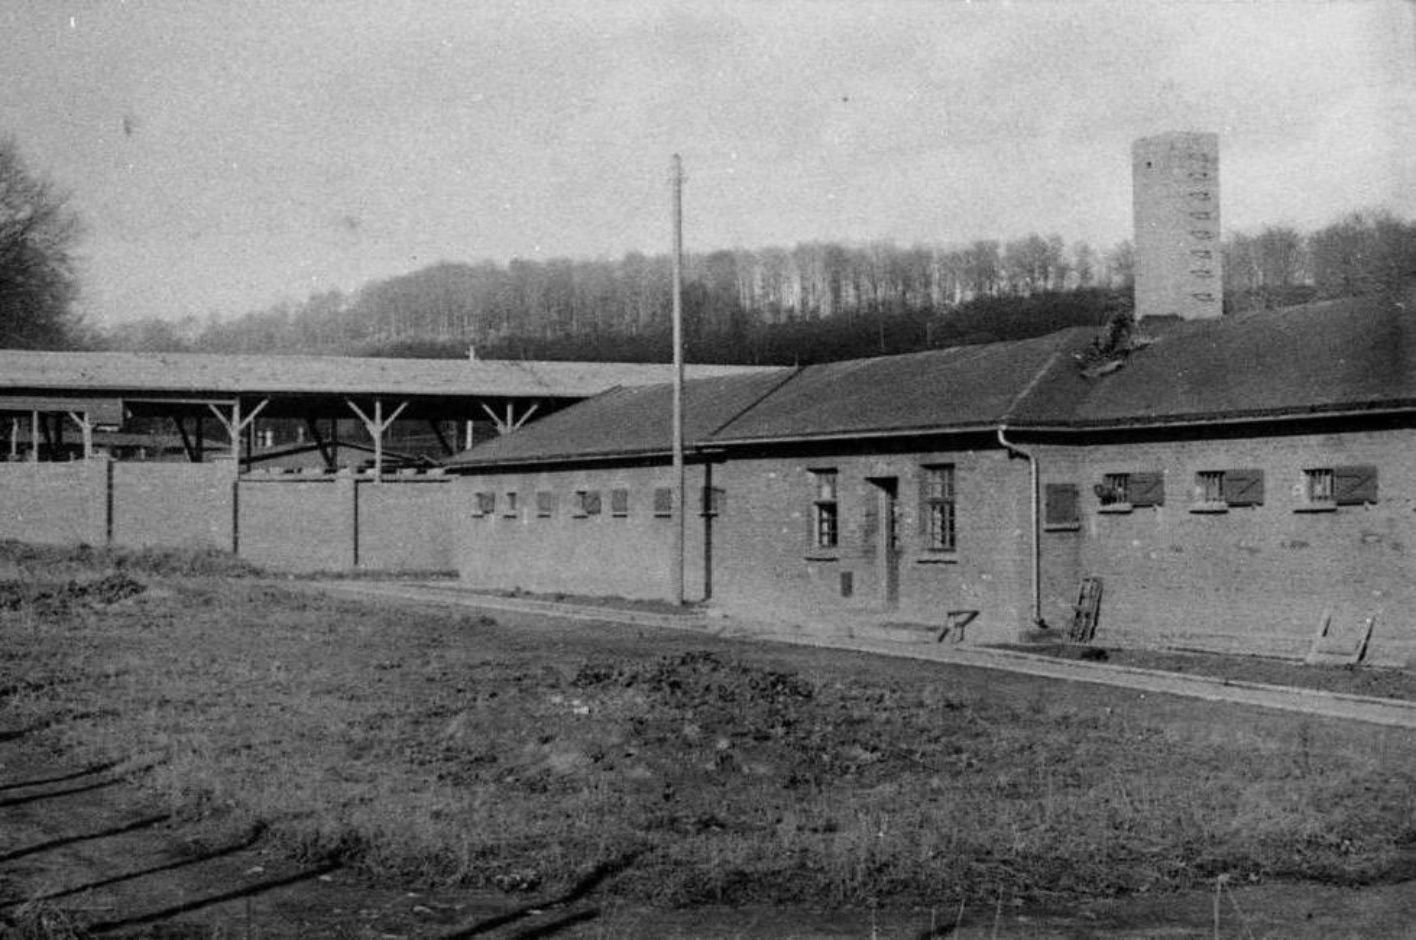 View of the prison cell building with barred windows. On the left in the background a storage shed belonging to the wood yard.